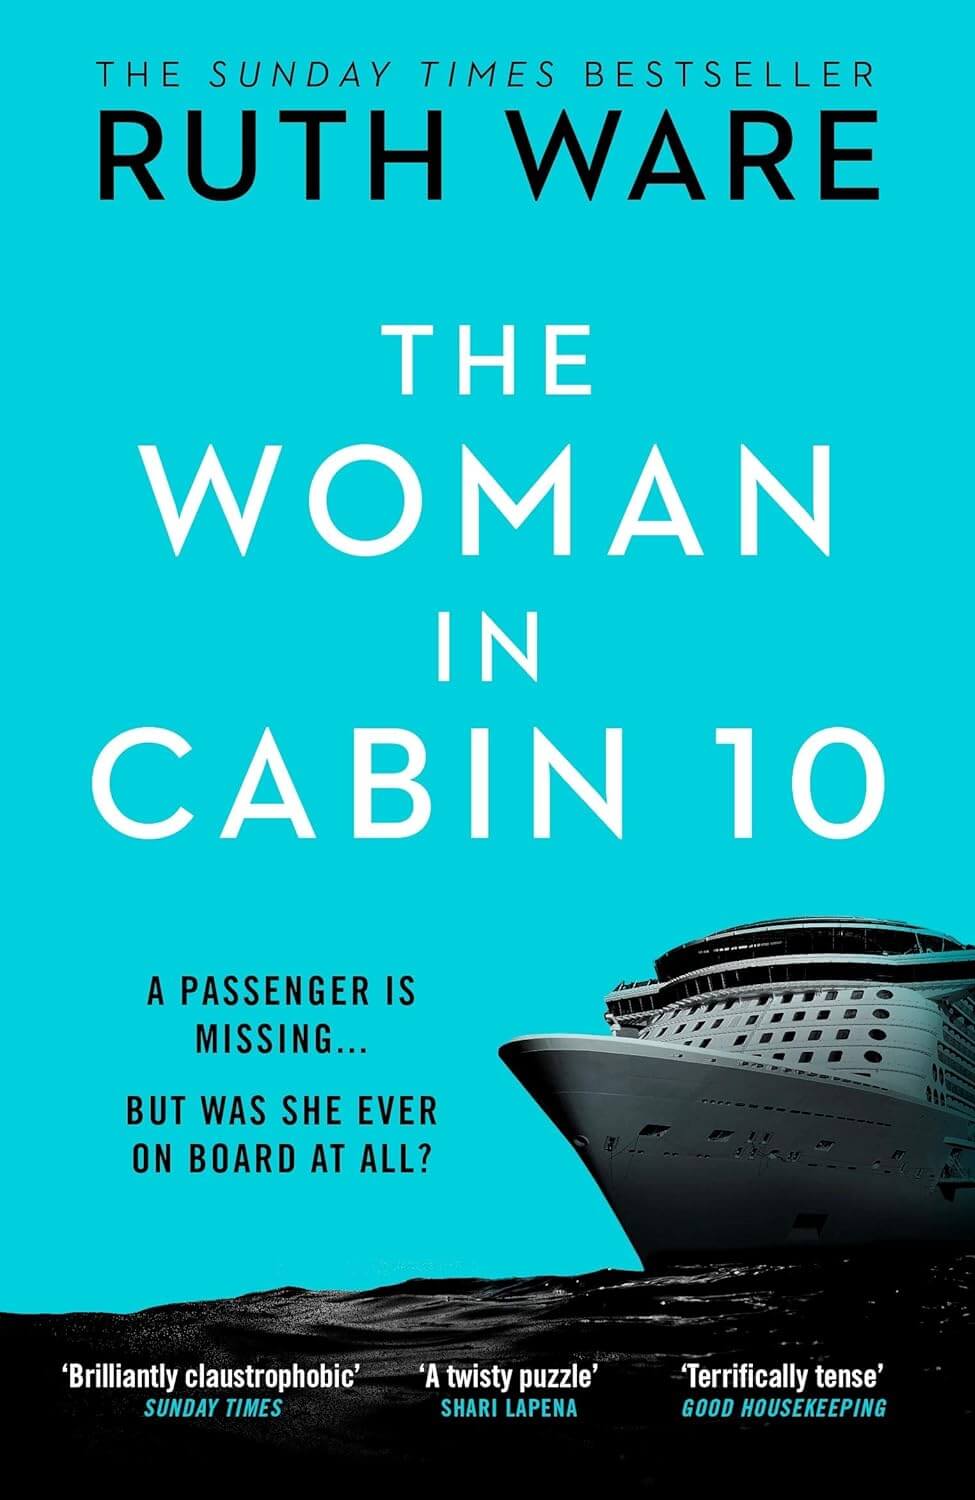 the-woman-in-cabin-10-by-ruth-ware